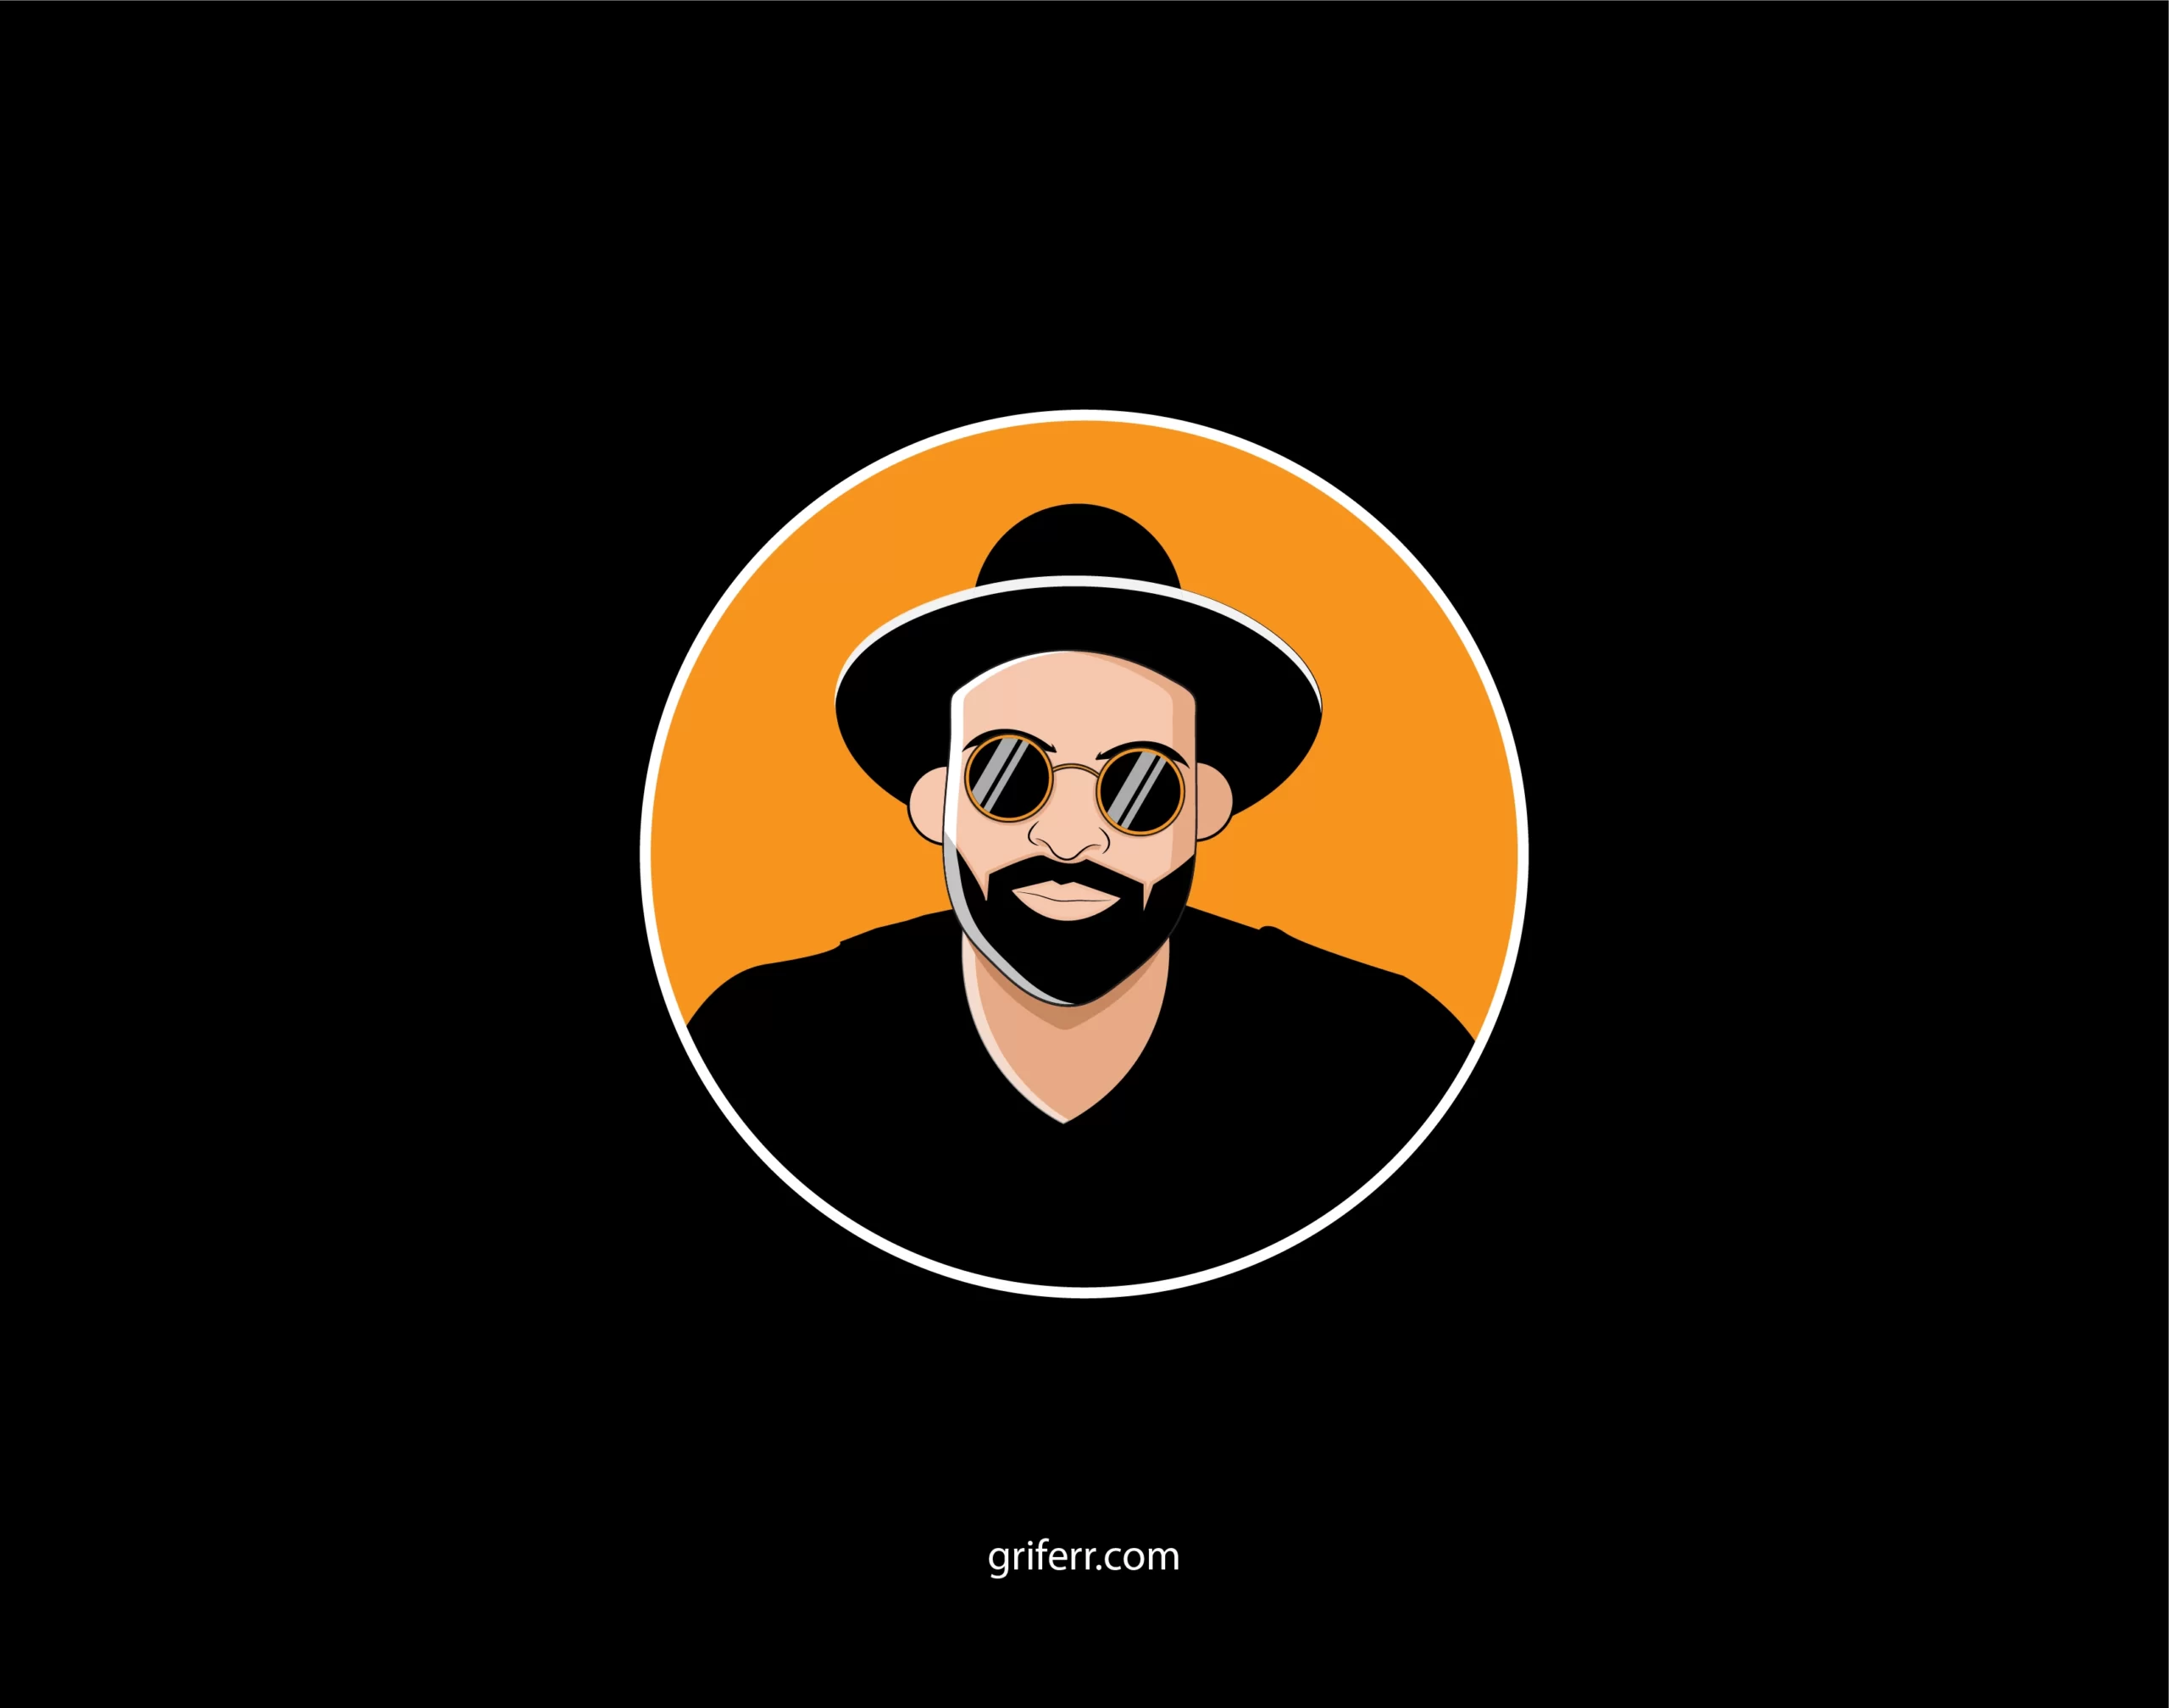 Flat portrait design of a bearded man in black glasses, sporting a stylish black t-shirt against a simple backdrop.